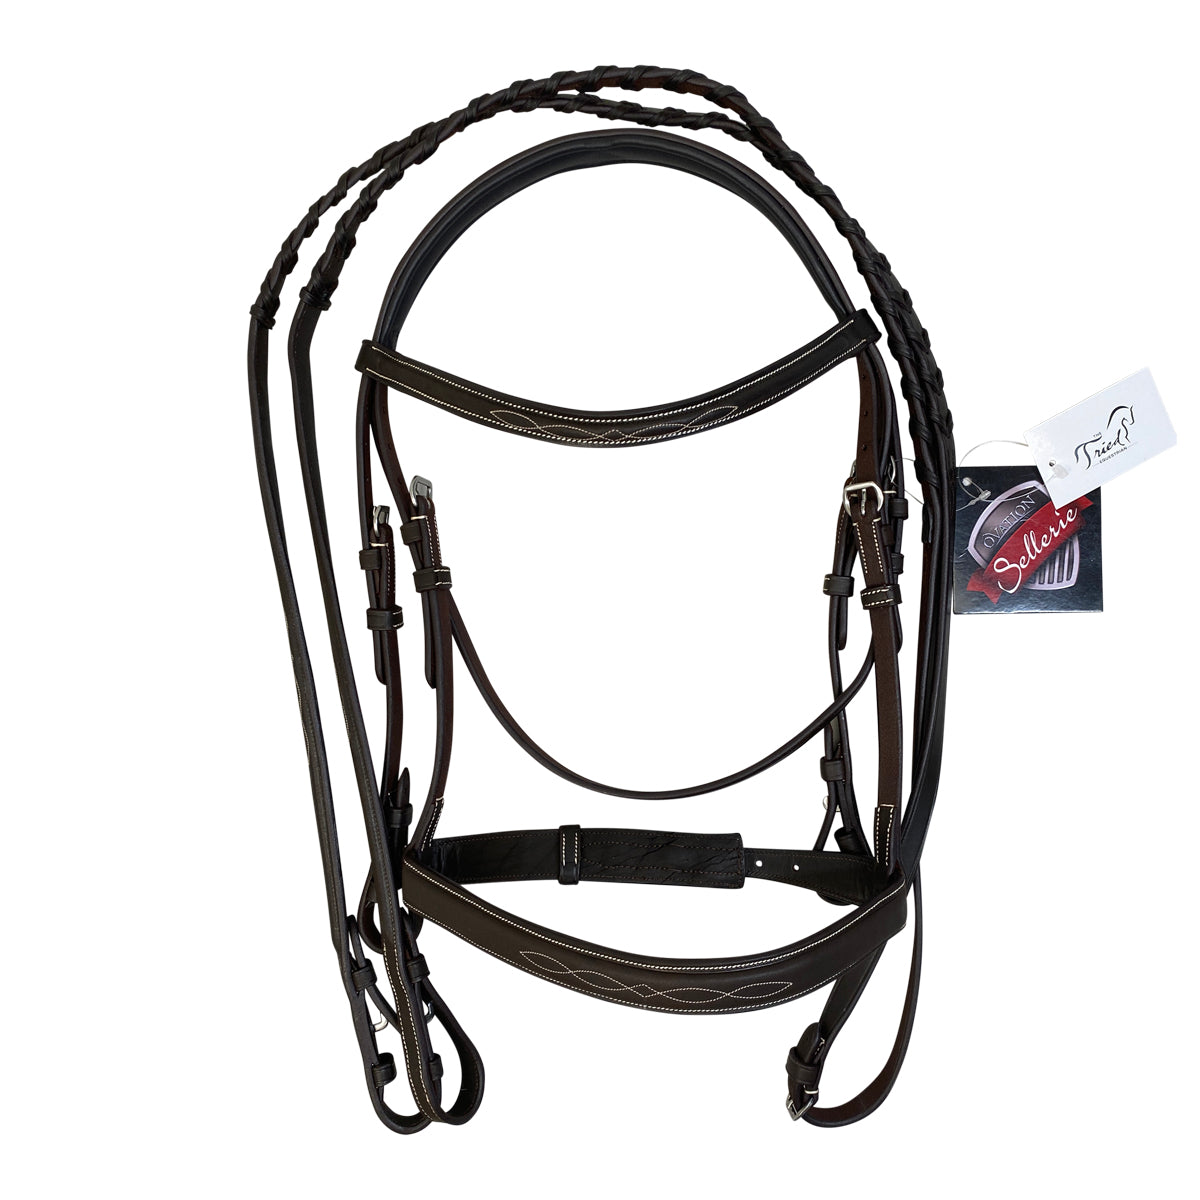 Ovation Classic 'Fancy Stitched Wide Nose Comfort Crown' Bridle in Brown - Cob